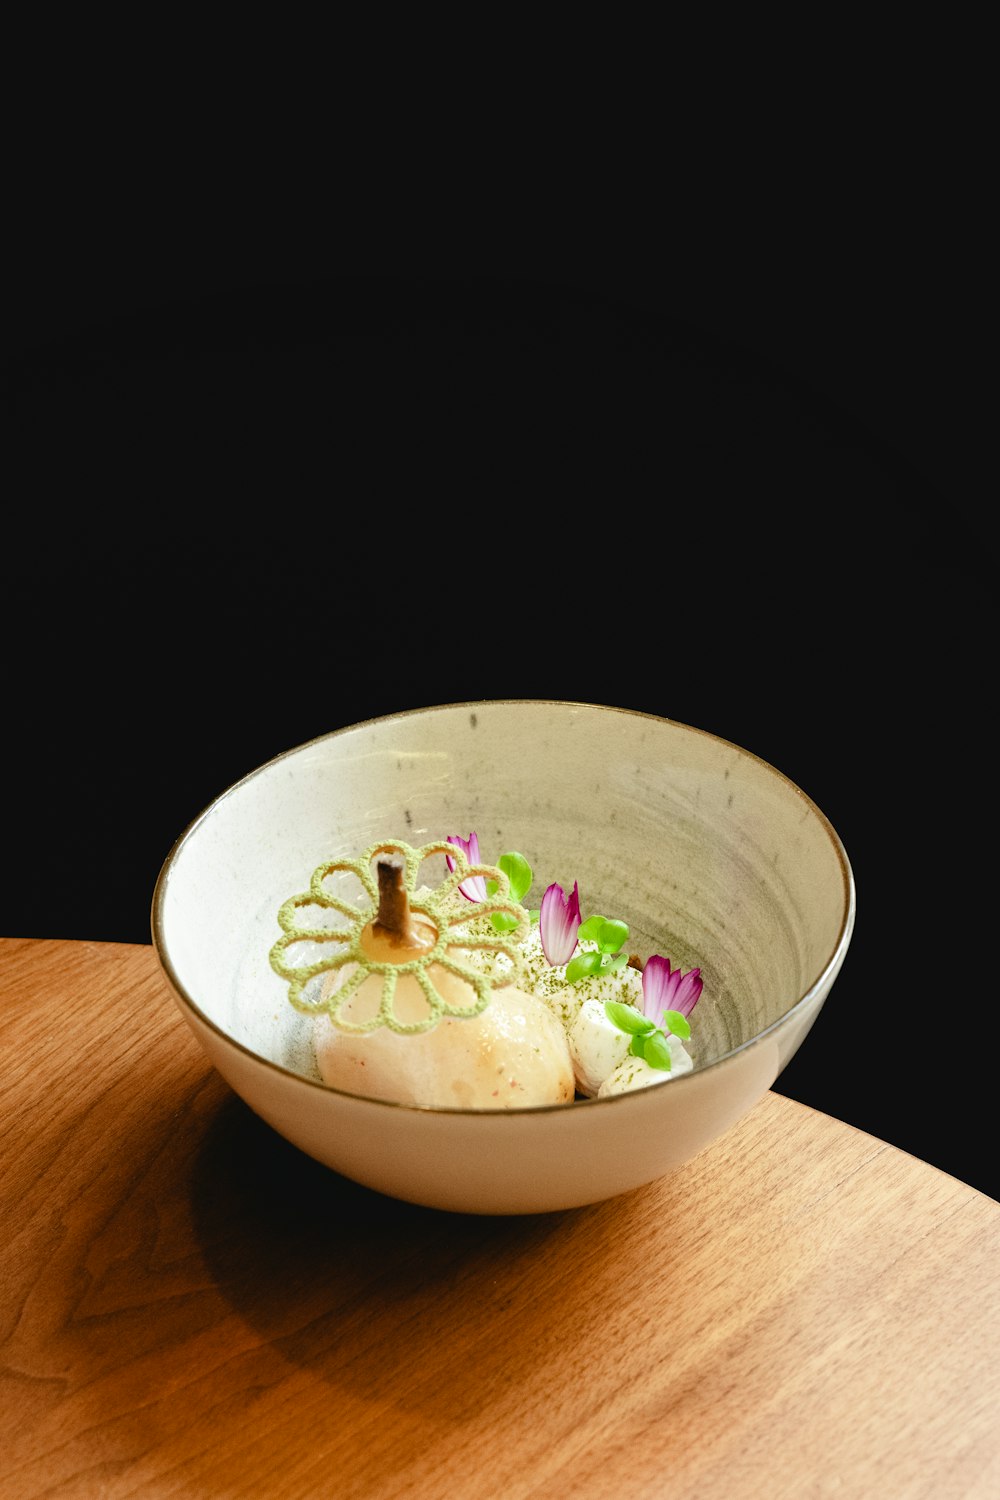 a white bowl filled with food on top of a wooden table